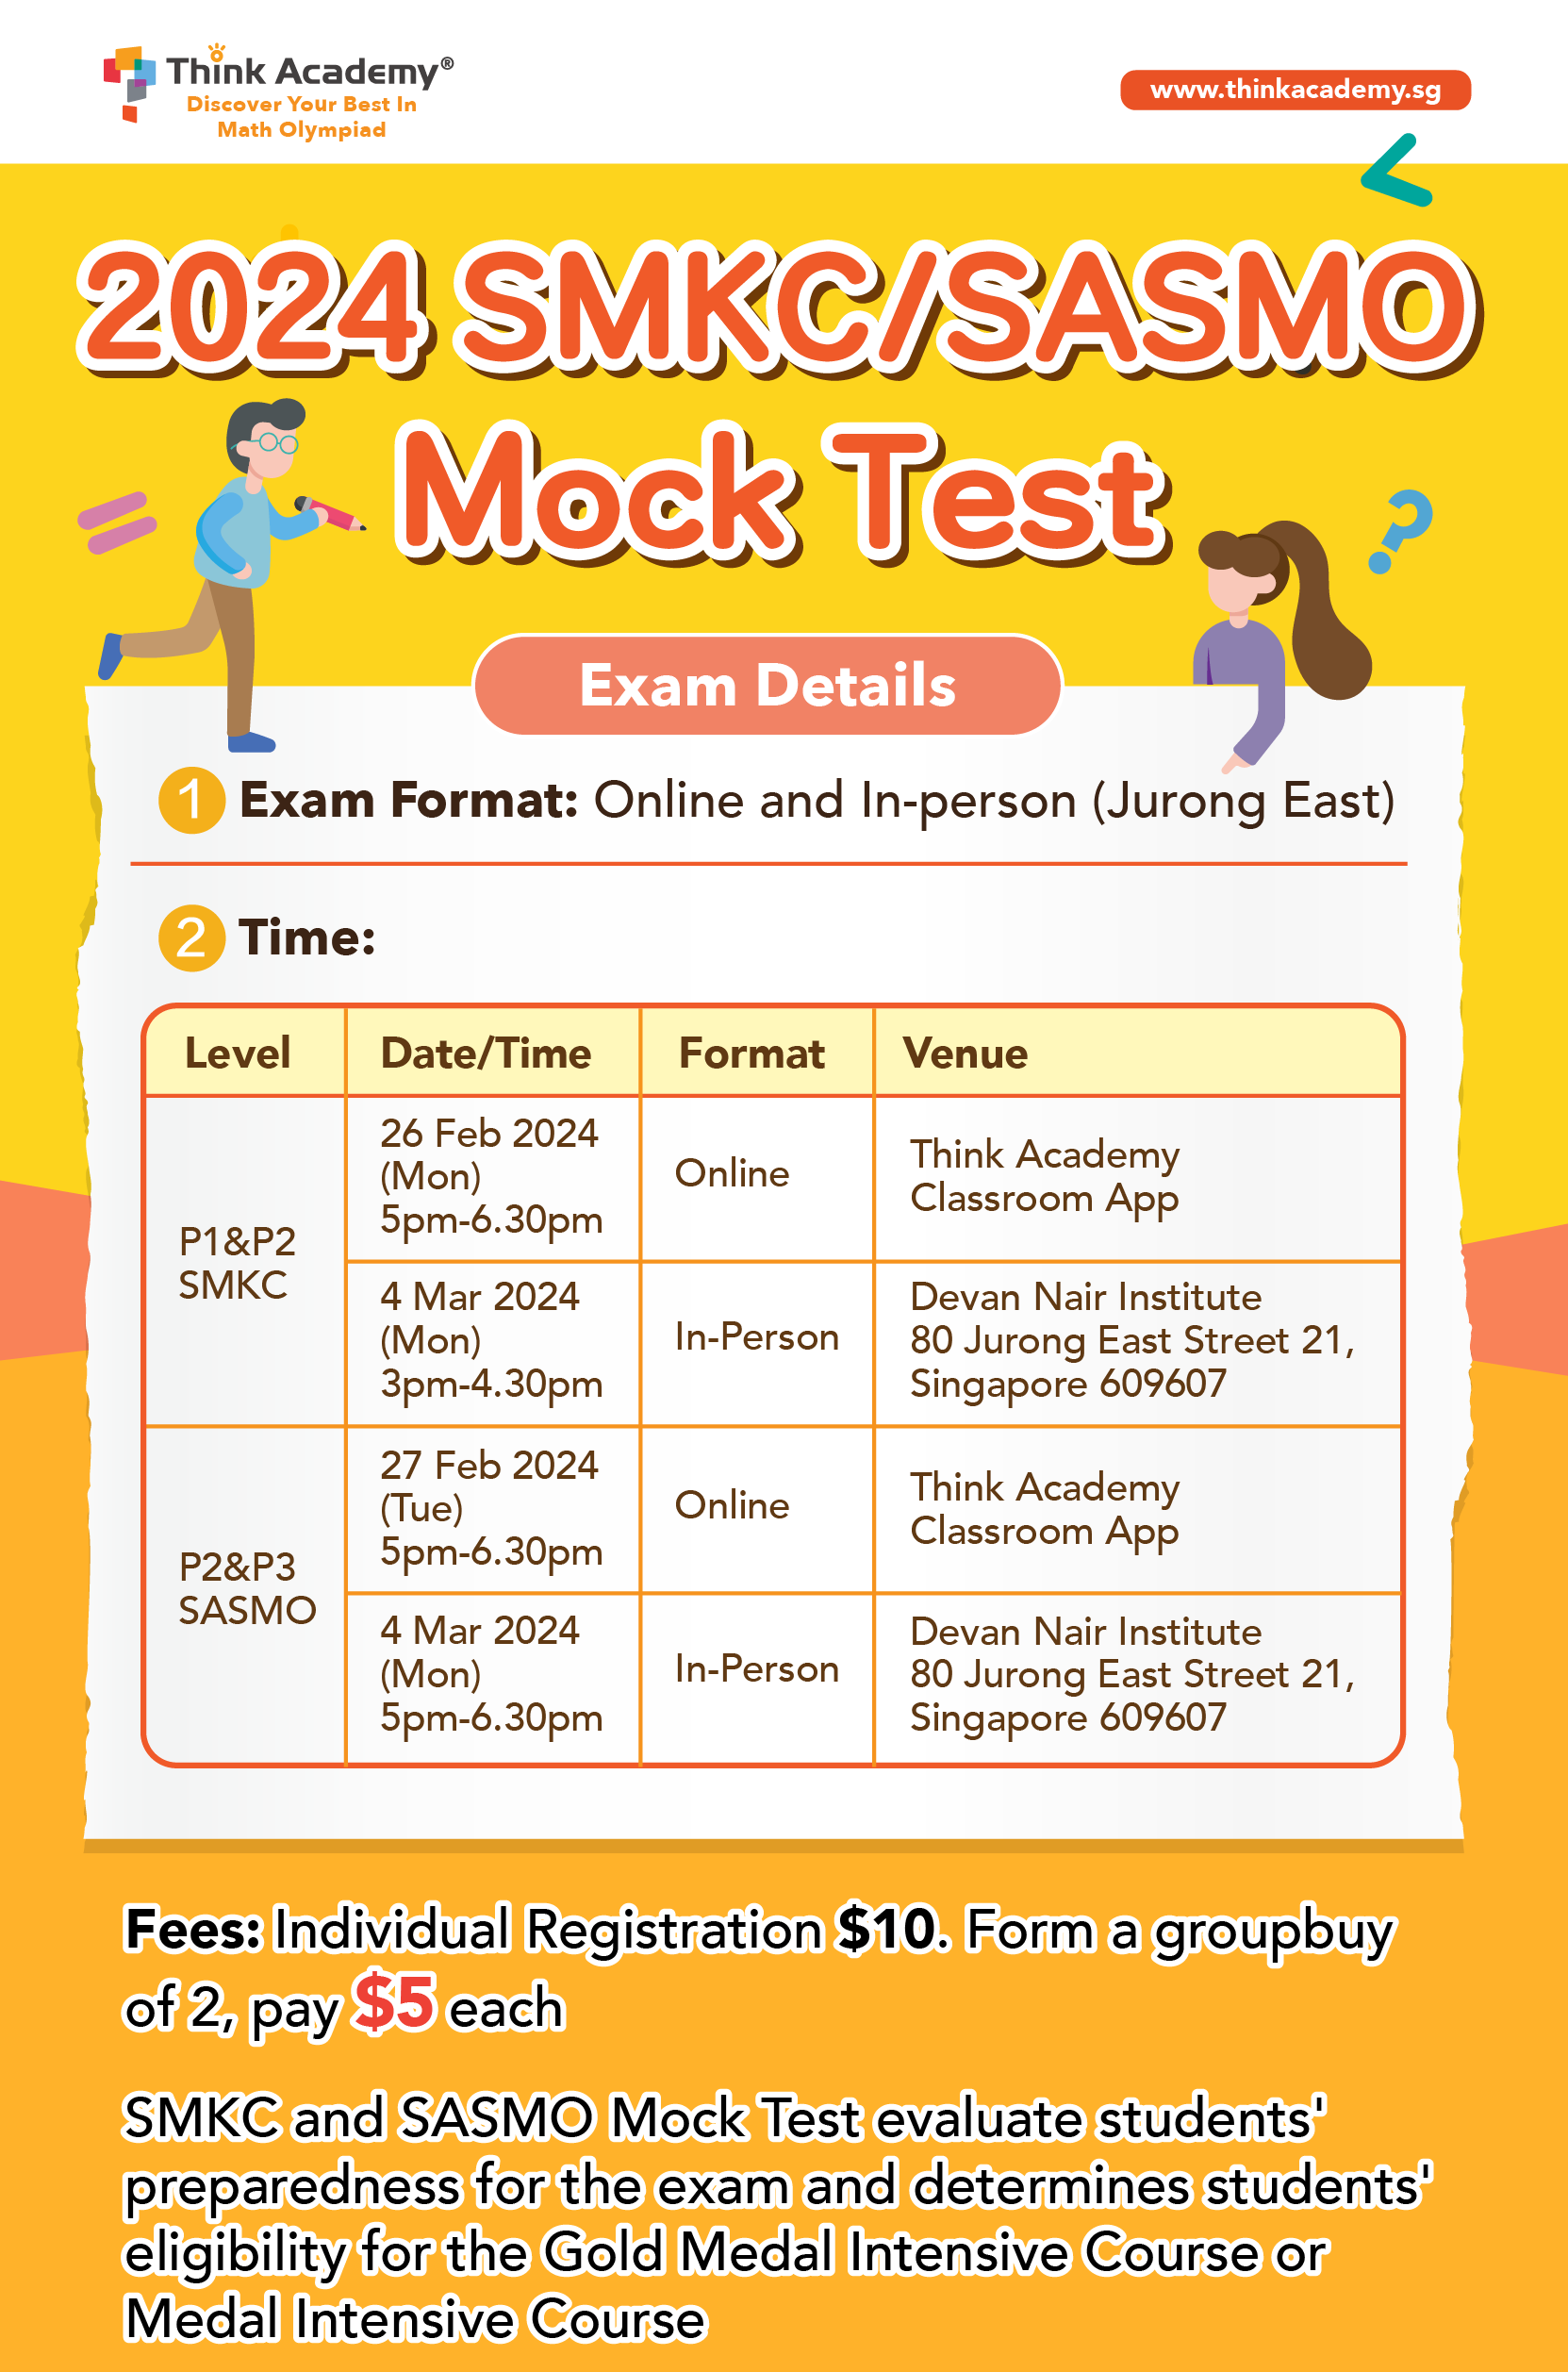 2024 SMKC and SASMO Preparation Mock Test from Think Academy is starting!